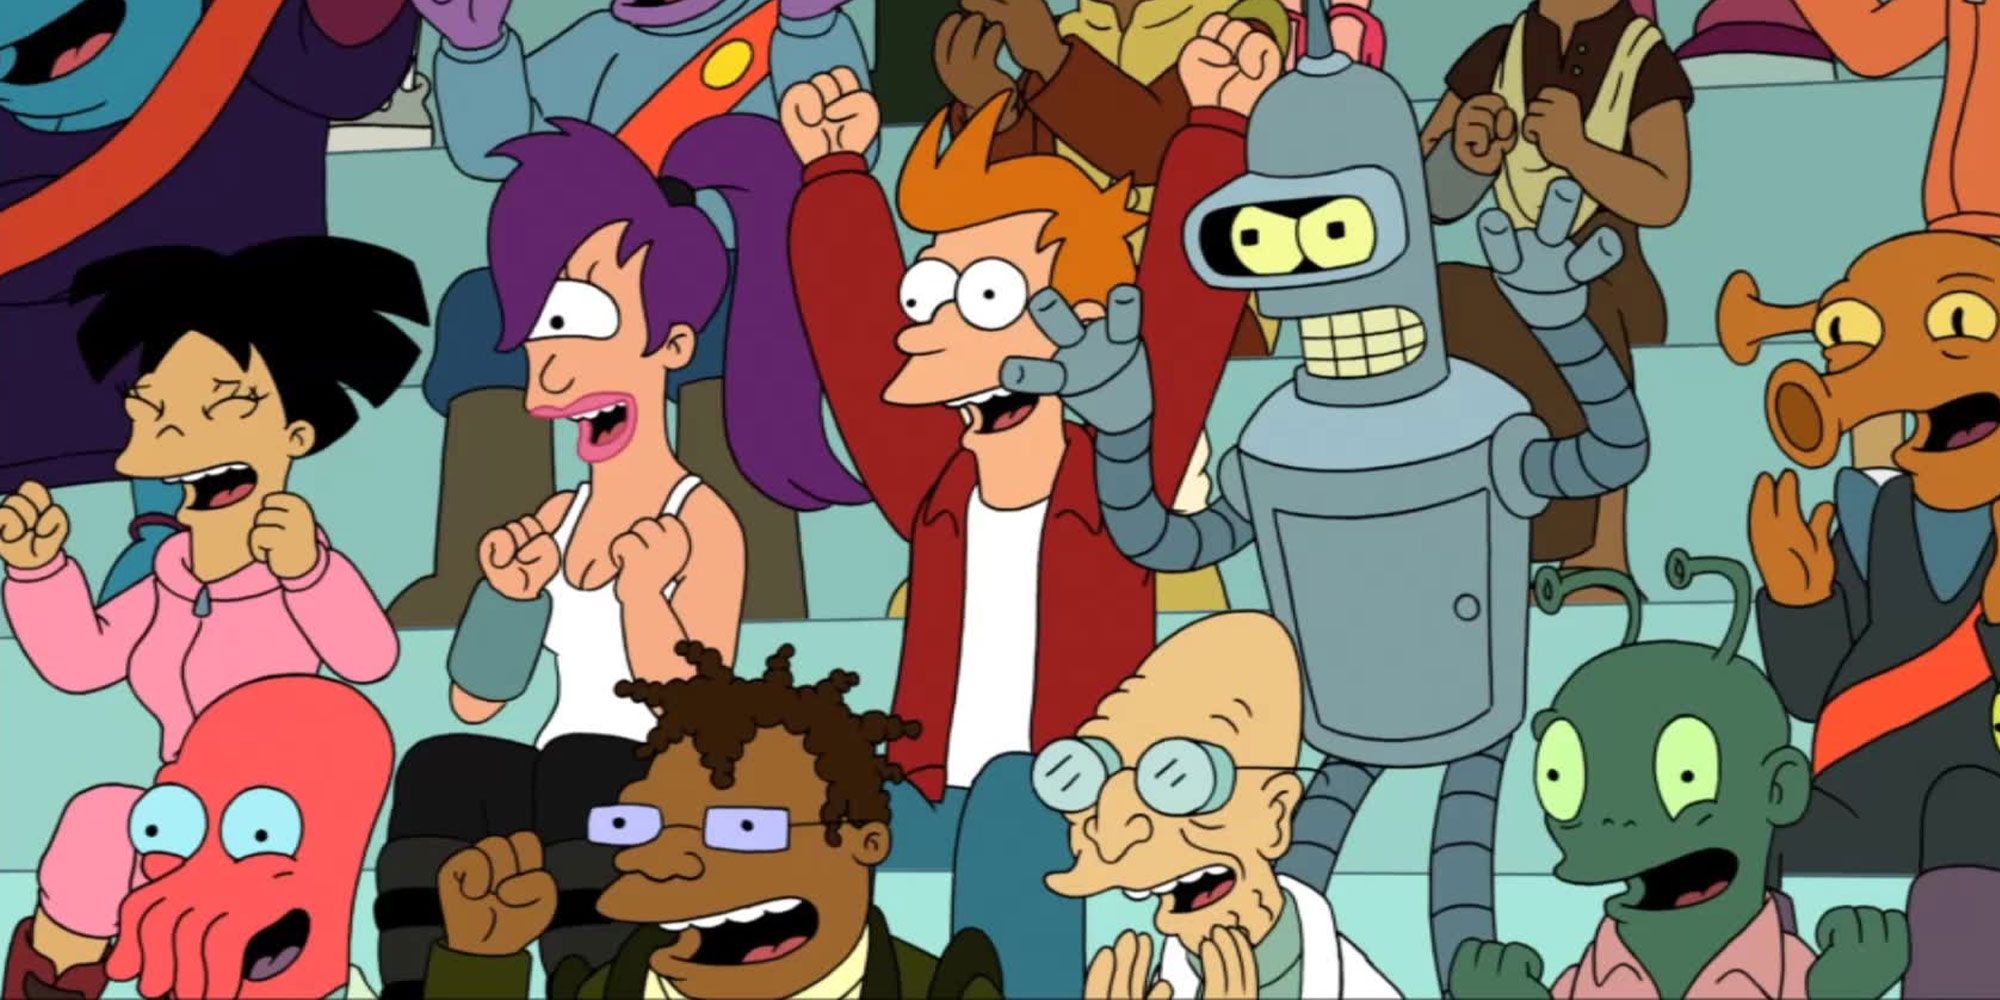 Futurama characters cheering in the stands